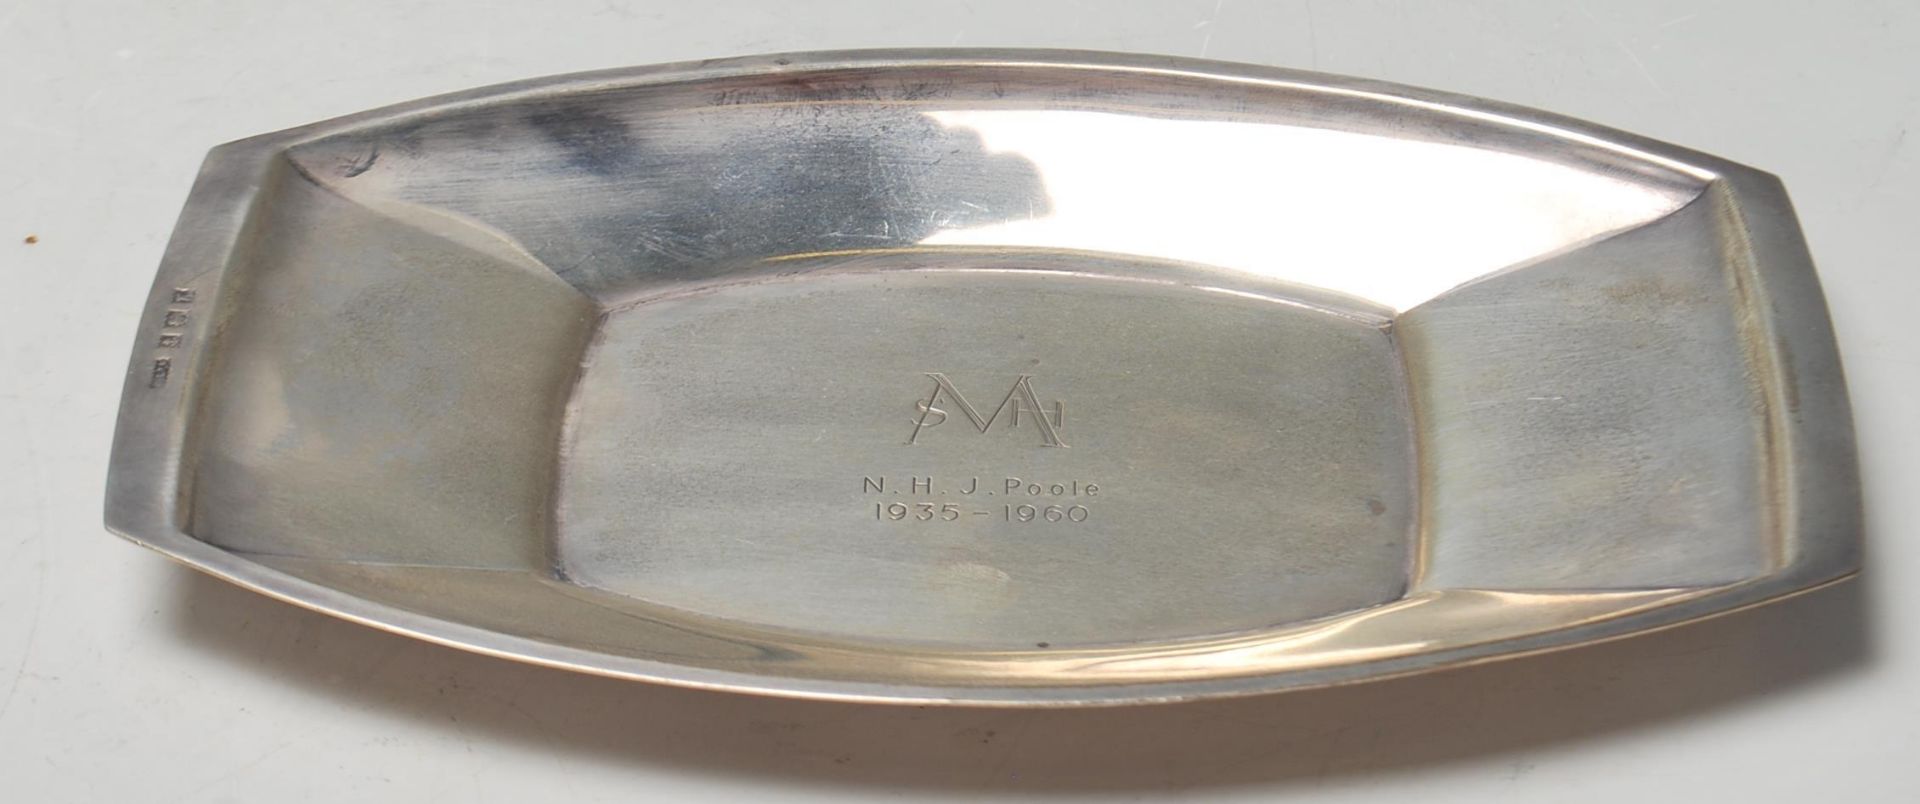 A silver hallmarked dish of lozenge form with raised edges. Central notation for SMH - NHJ Poole